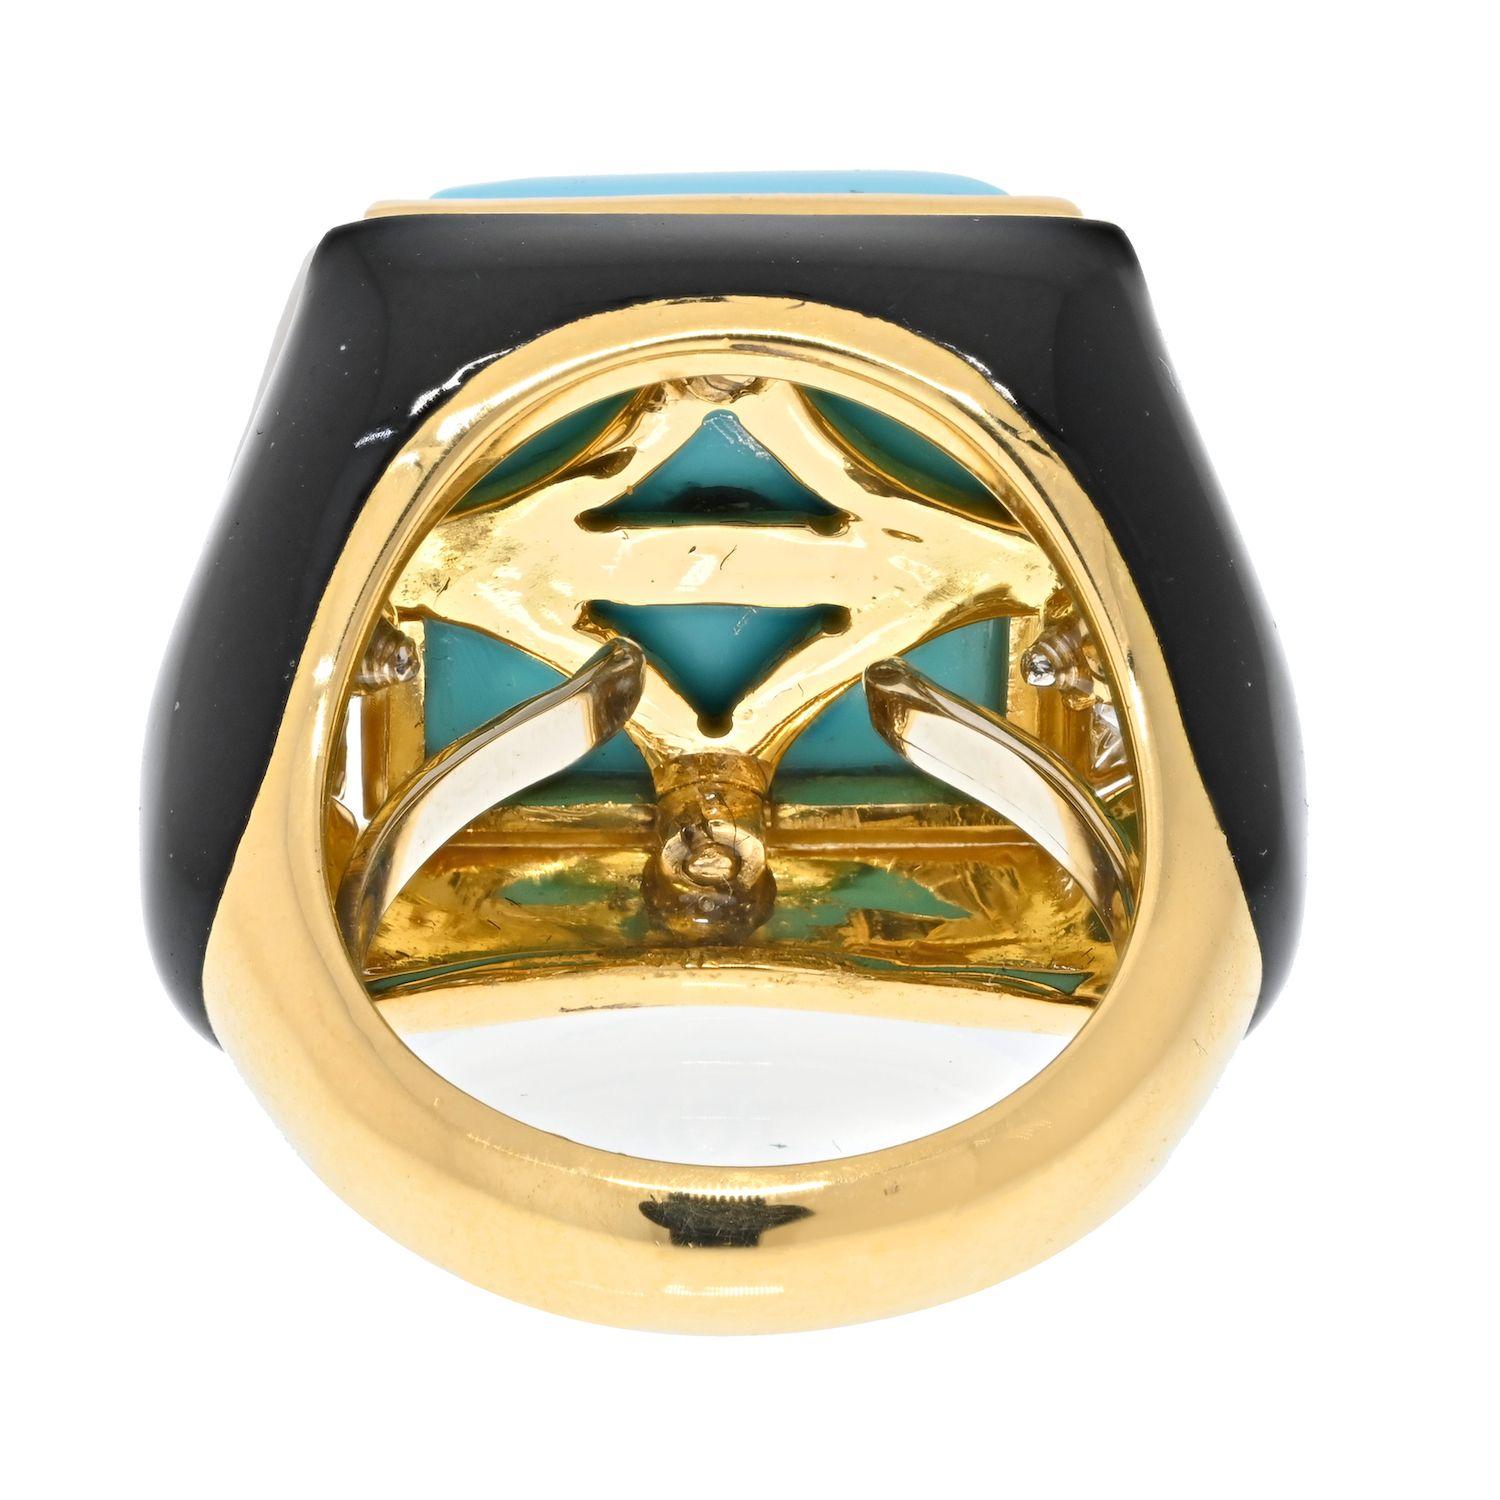 Bold color meets shimmering elegance in this turquoise and diamond pavé ring by David Webb. Make a splash with stunning colorful combination and unexpected material compositions. Every ring in our collection is very unique but we are particularly